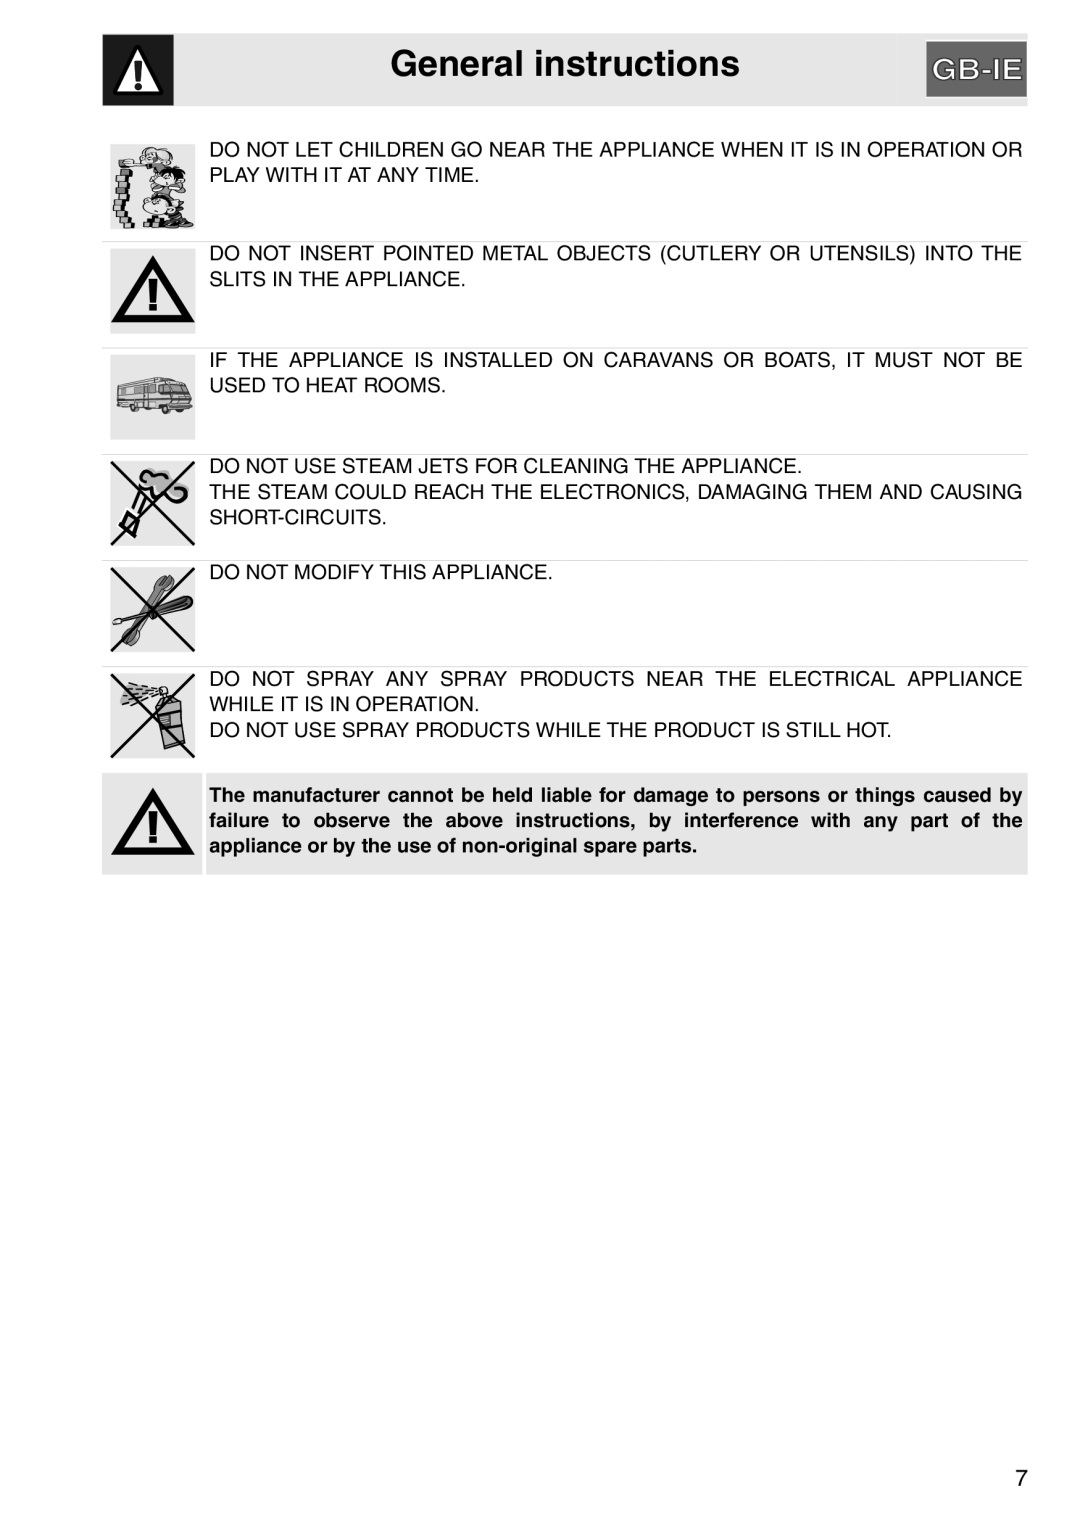 Smeg electric oven, SAP306X-9 General instructions, Do Not Use Steam Jets For Cleaning The Appliance 